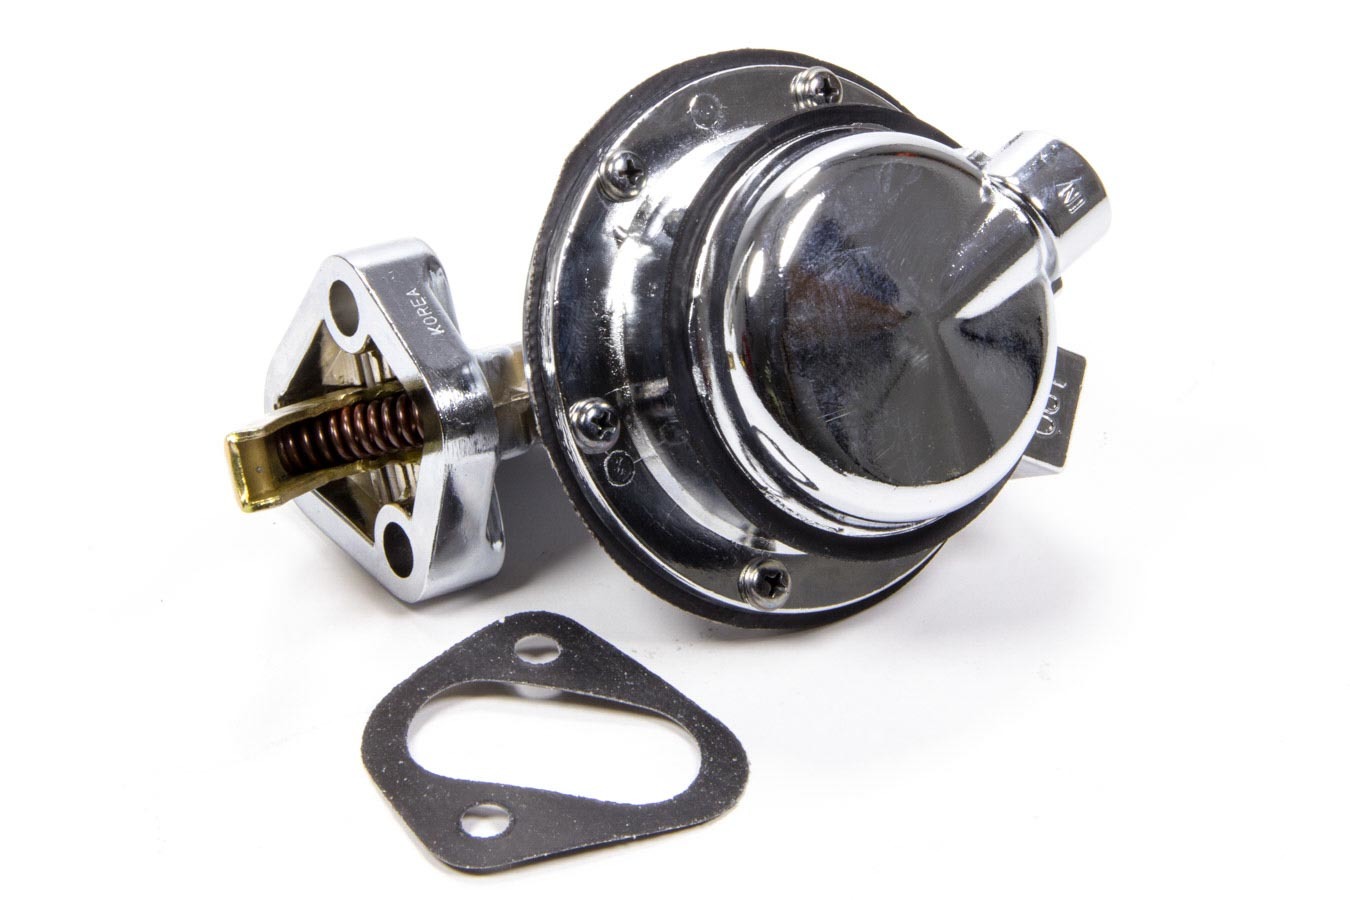 Fuel Pump - Mechanical - 110 gph - 6.5-8 psi - 3/8 in NPT Female Inlet / Outlet - Aluminum - Polished - Gas - Big Block Chevy - Each